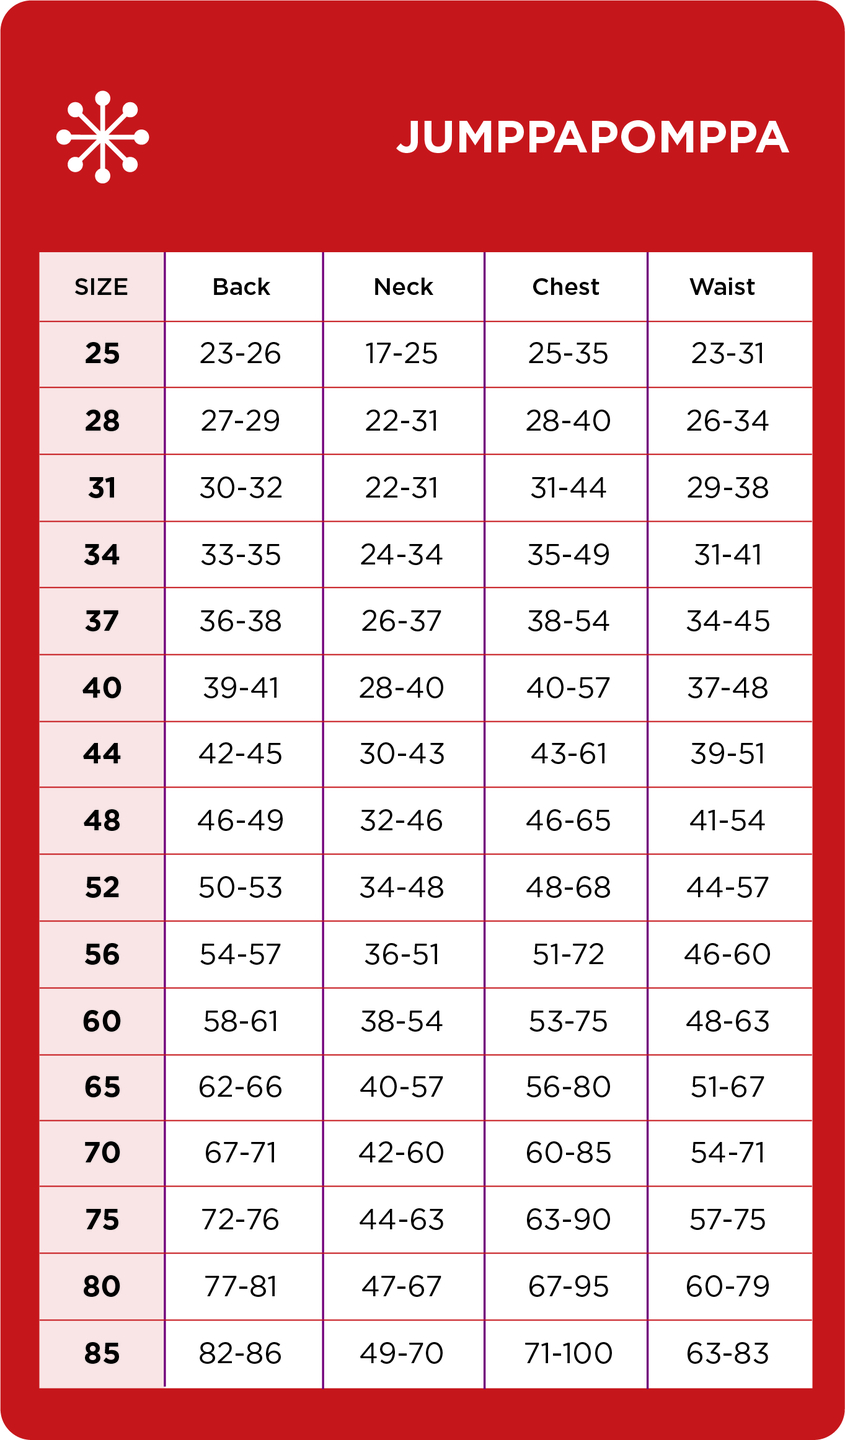 Click to open a large version of this table